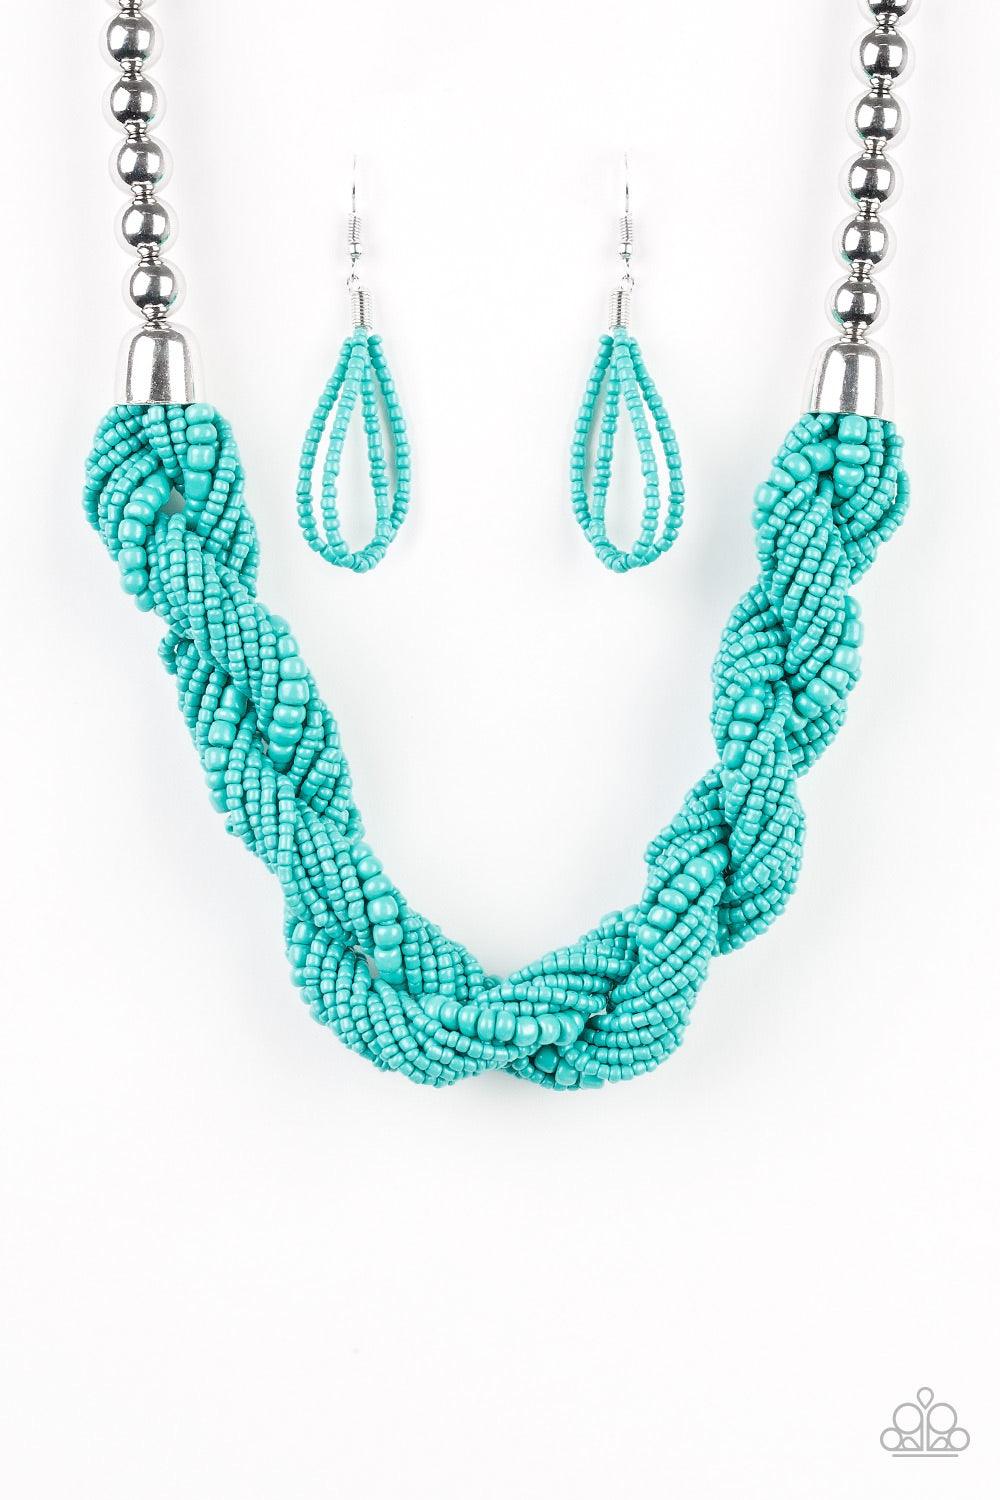 Paparazzi Accessories Savannah Surfin - Blue Glistening silver beads give way to strands of twisting turquoise seed beads below the collar for a summery flair. Features an adjustable clasp closure. Jewelry